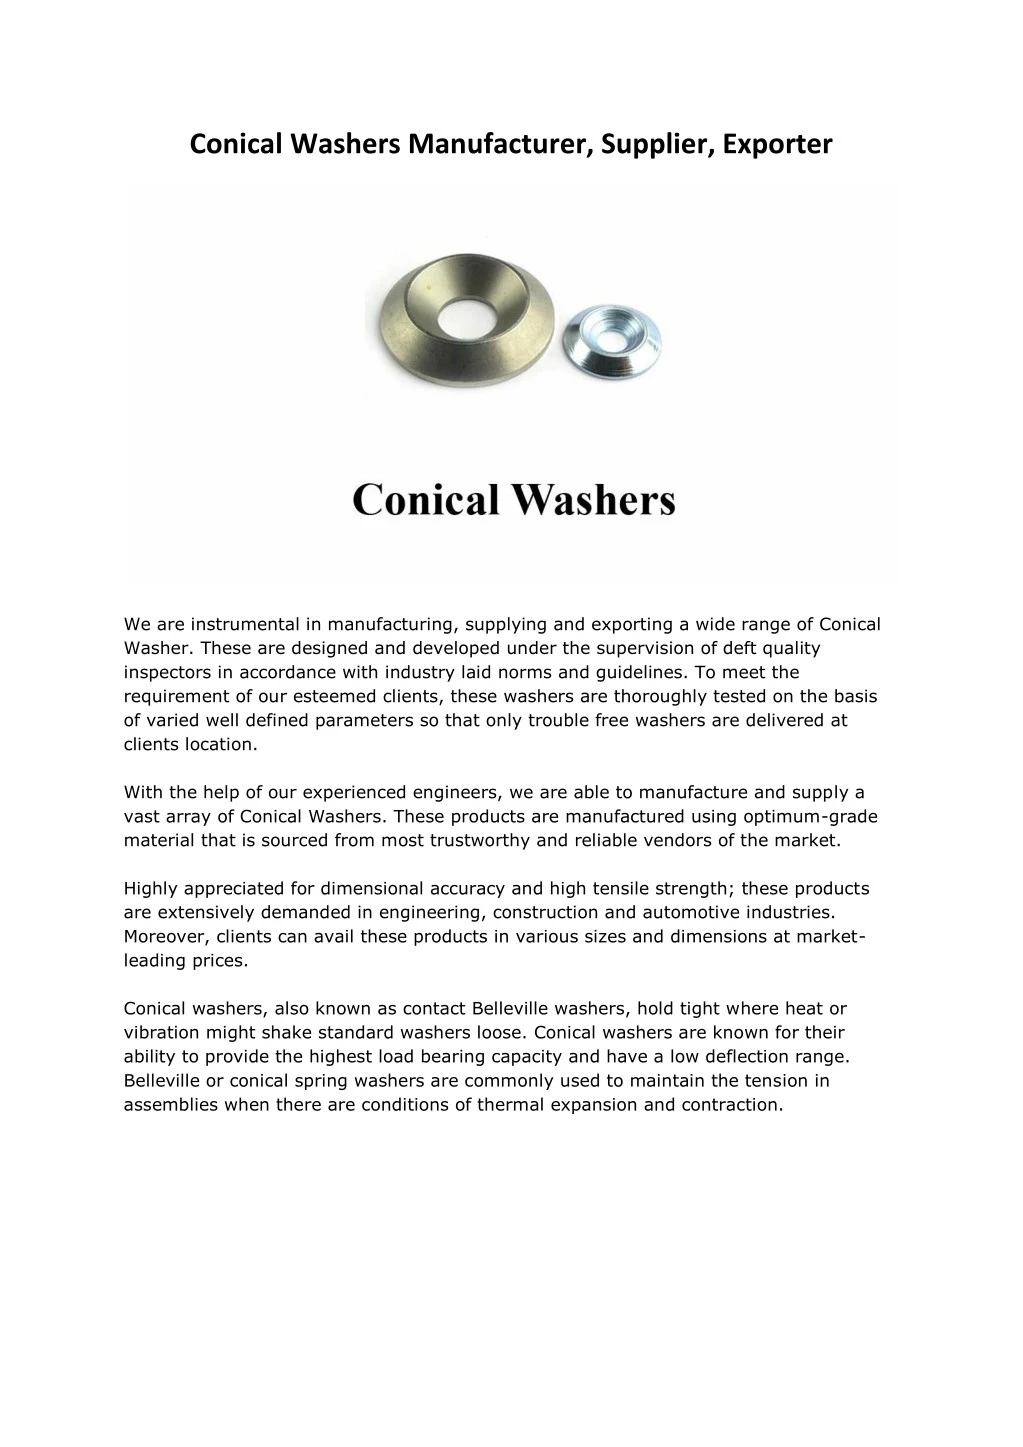 conical washers manufacturer supplier exporter